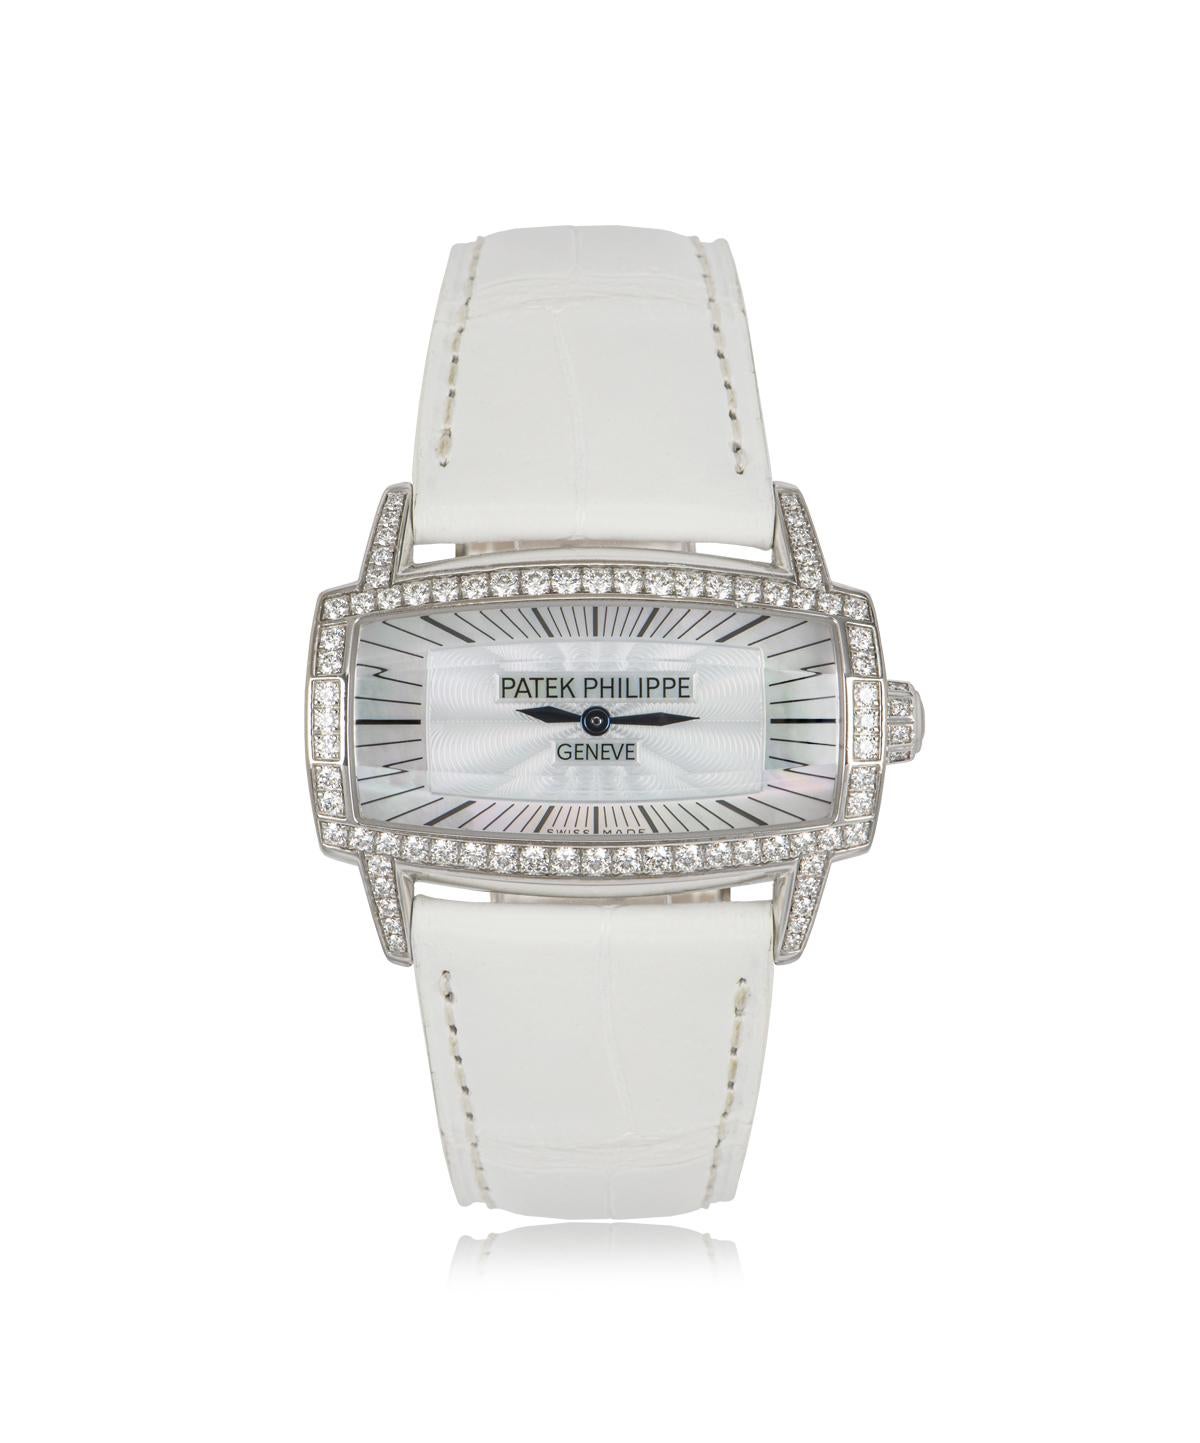 A quartz 37mm Gondolo  Gemma women's wristwatch, made from 18k white gold, by Patek Philippe.

The white mother of pearl dial is protected by a faceted sapphire crystal and surrounded by a fixed bezel and lugs, which are set with a total of